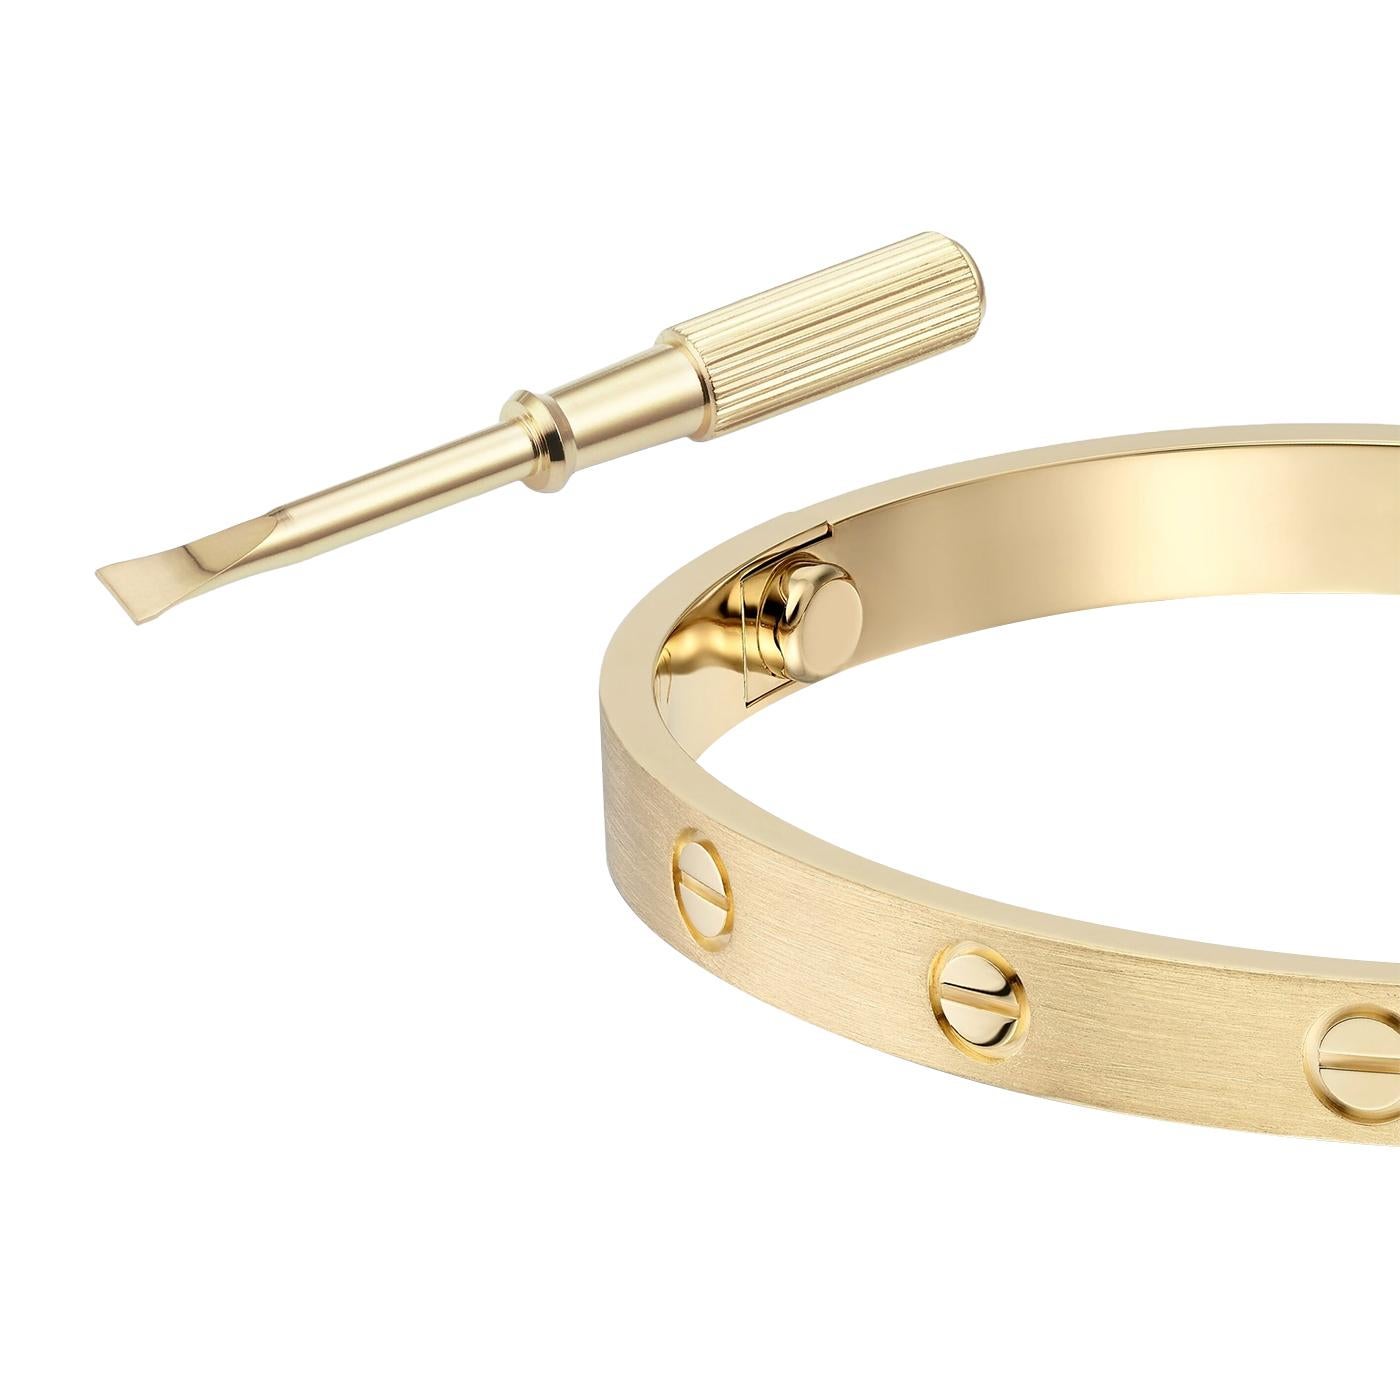 Modernist Cartier Love Bracelet 18K Yellow Gold Size 15 Brushed Finish with Screwdriver For Sale